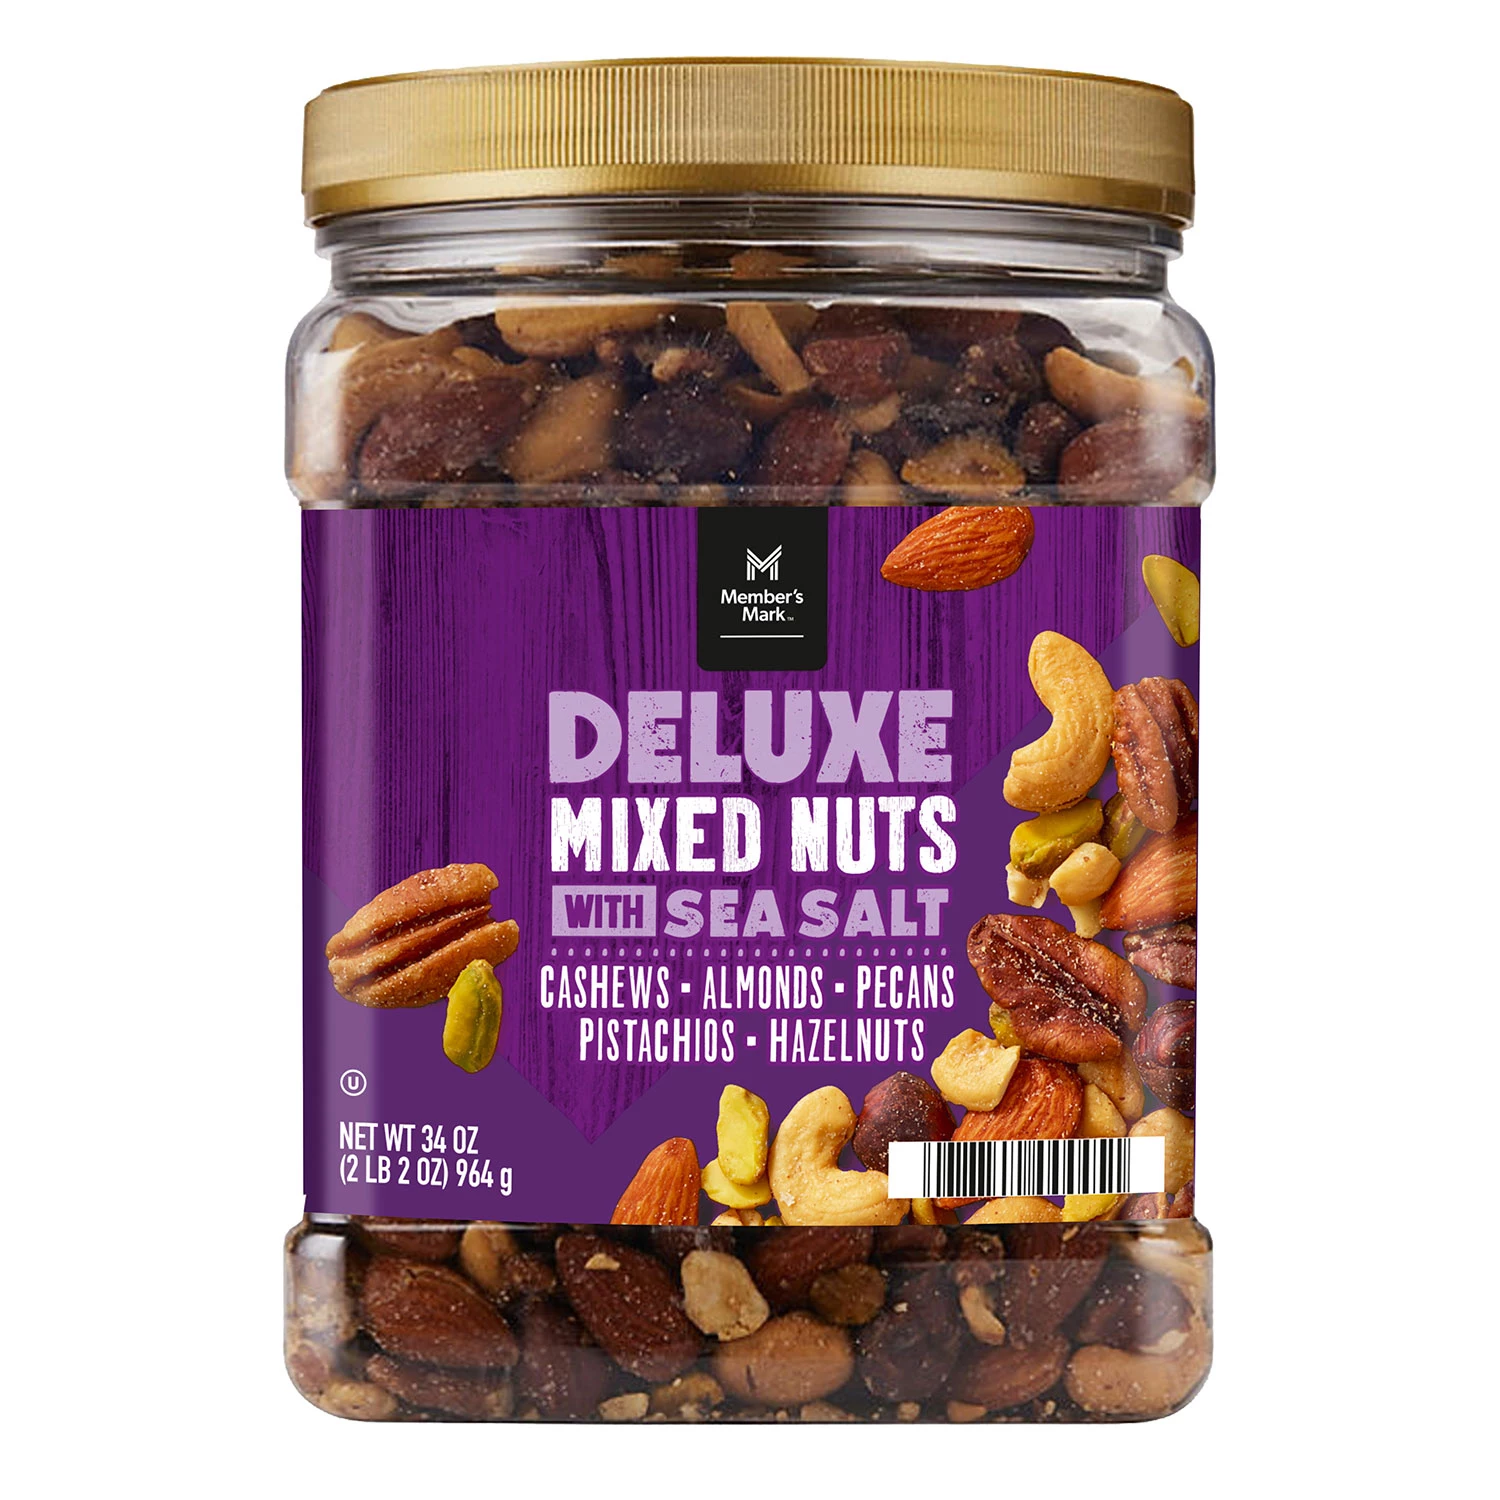 Member's Mark Deluxe Mixed Nuts with Sea Salt